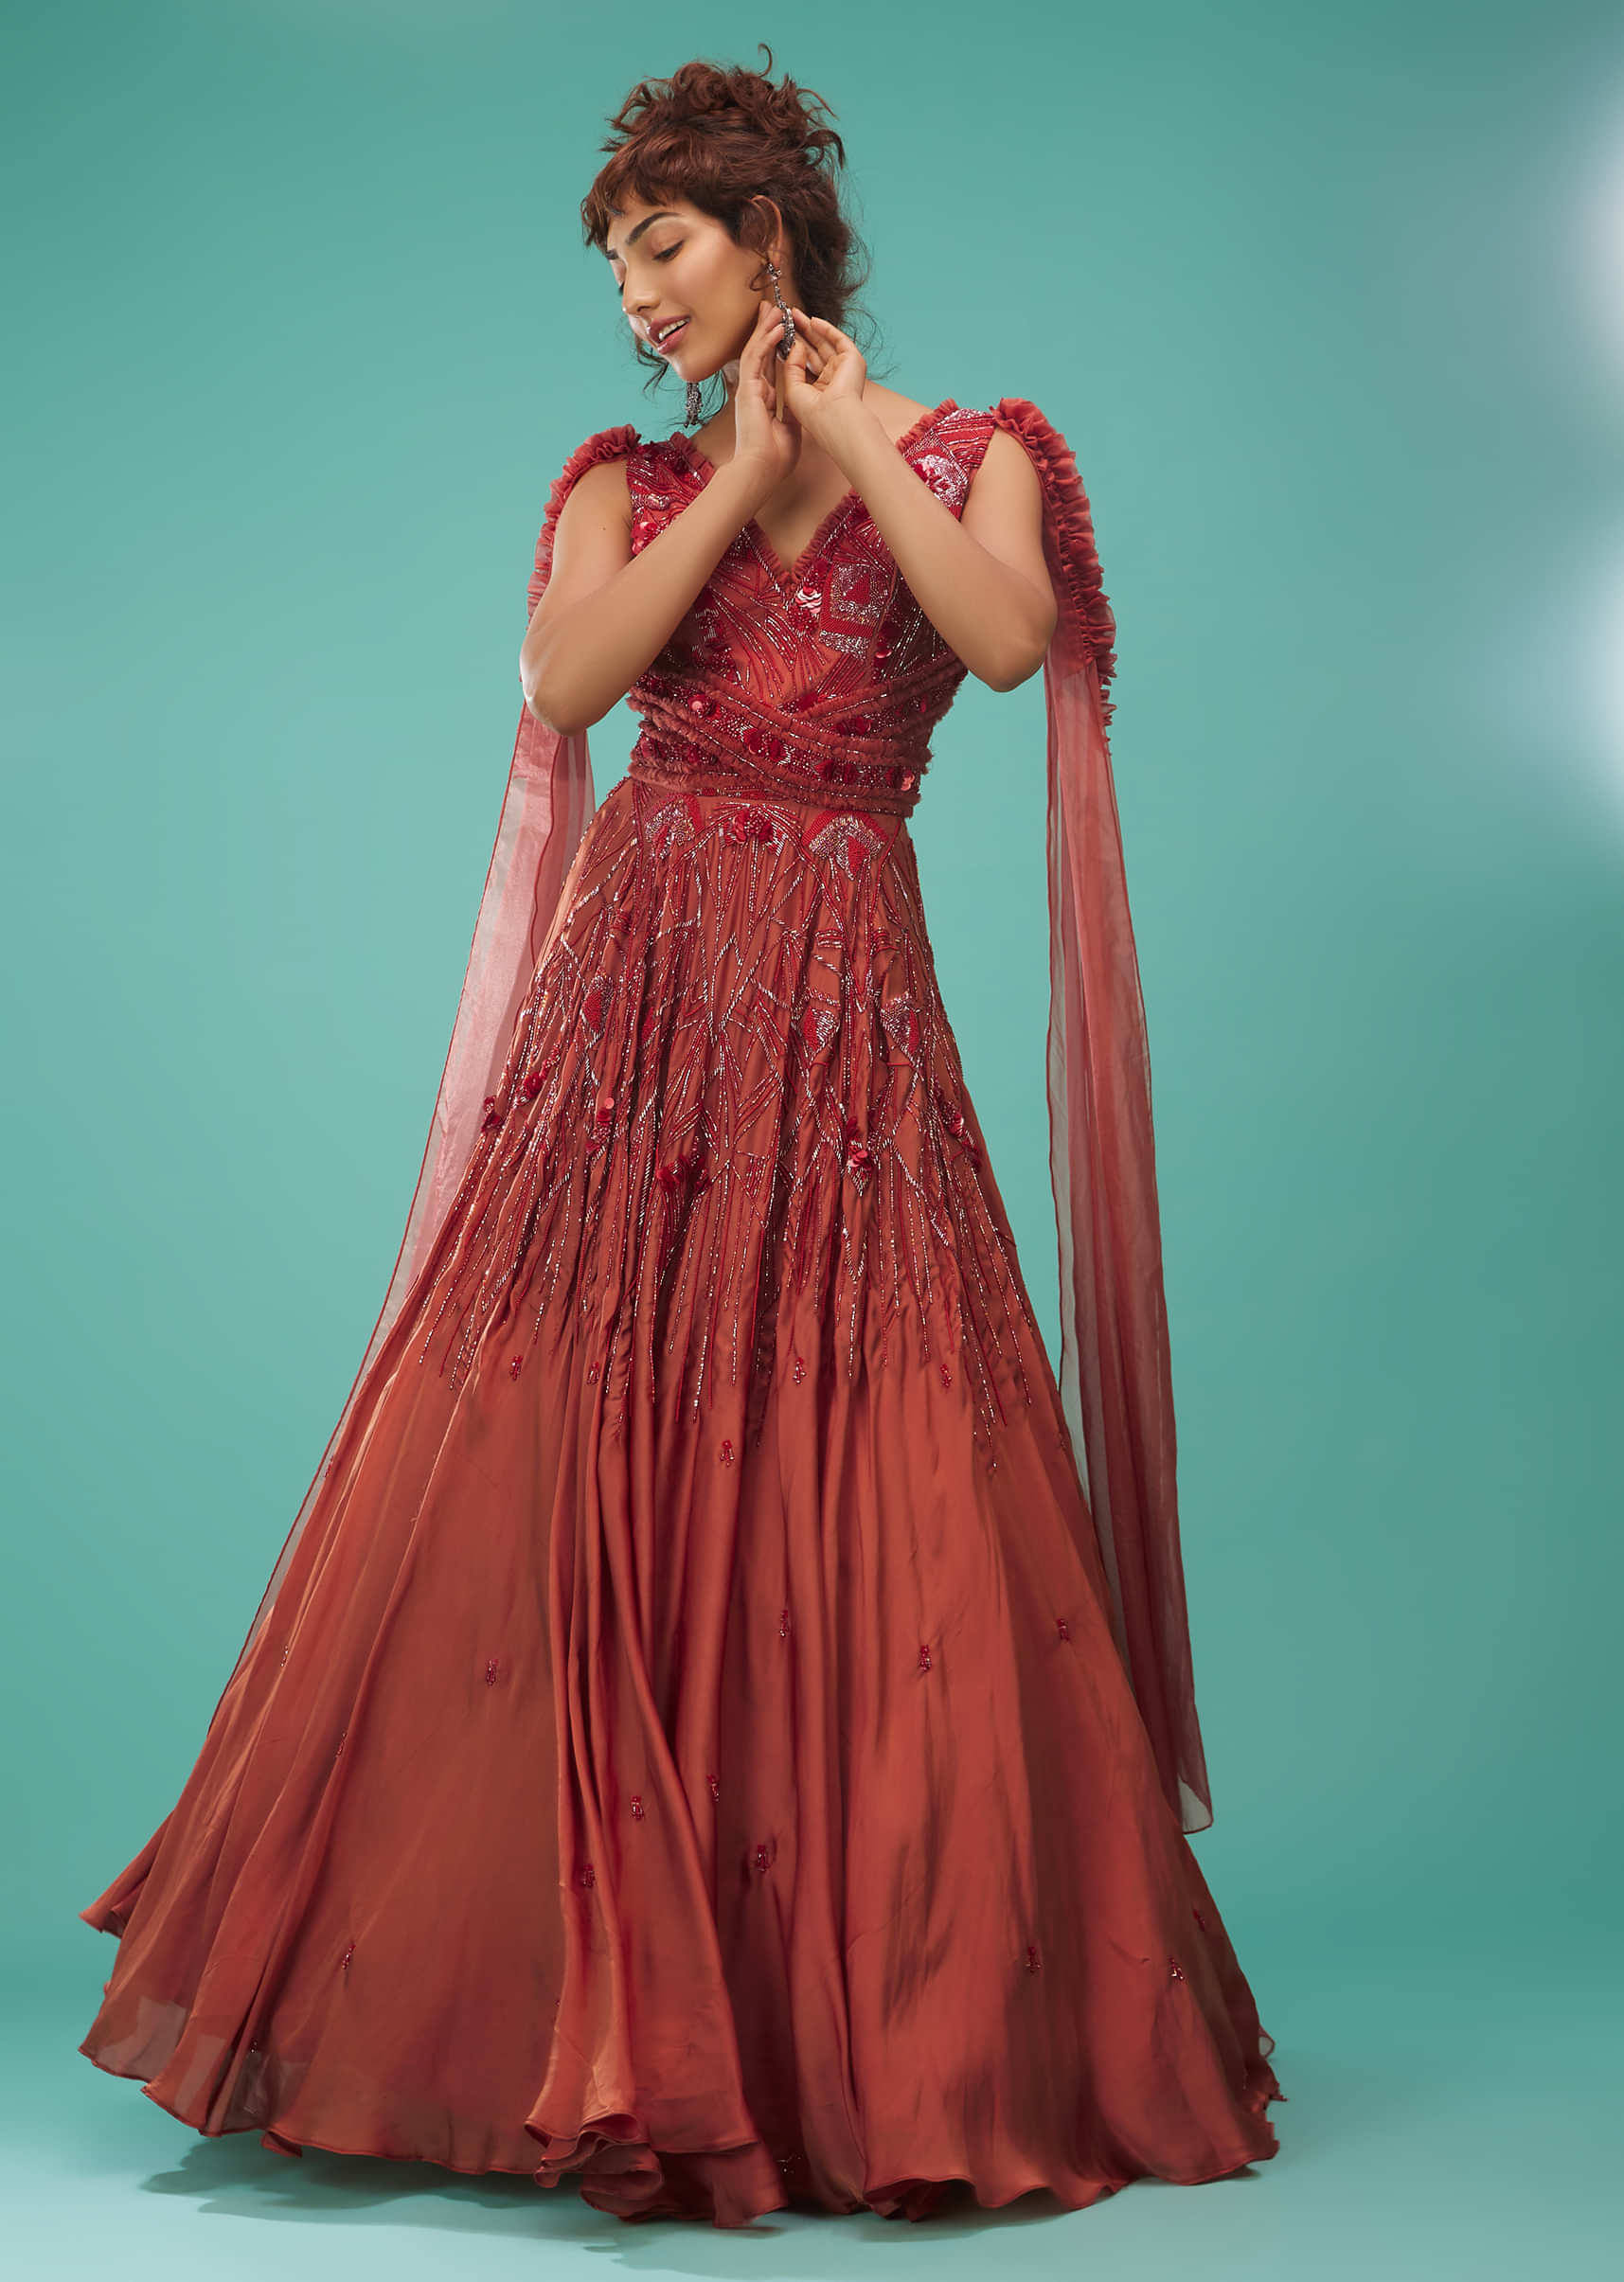 Kalki Burnt Sienna Red Ball Gown With Ruffle Frills And Embroidery